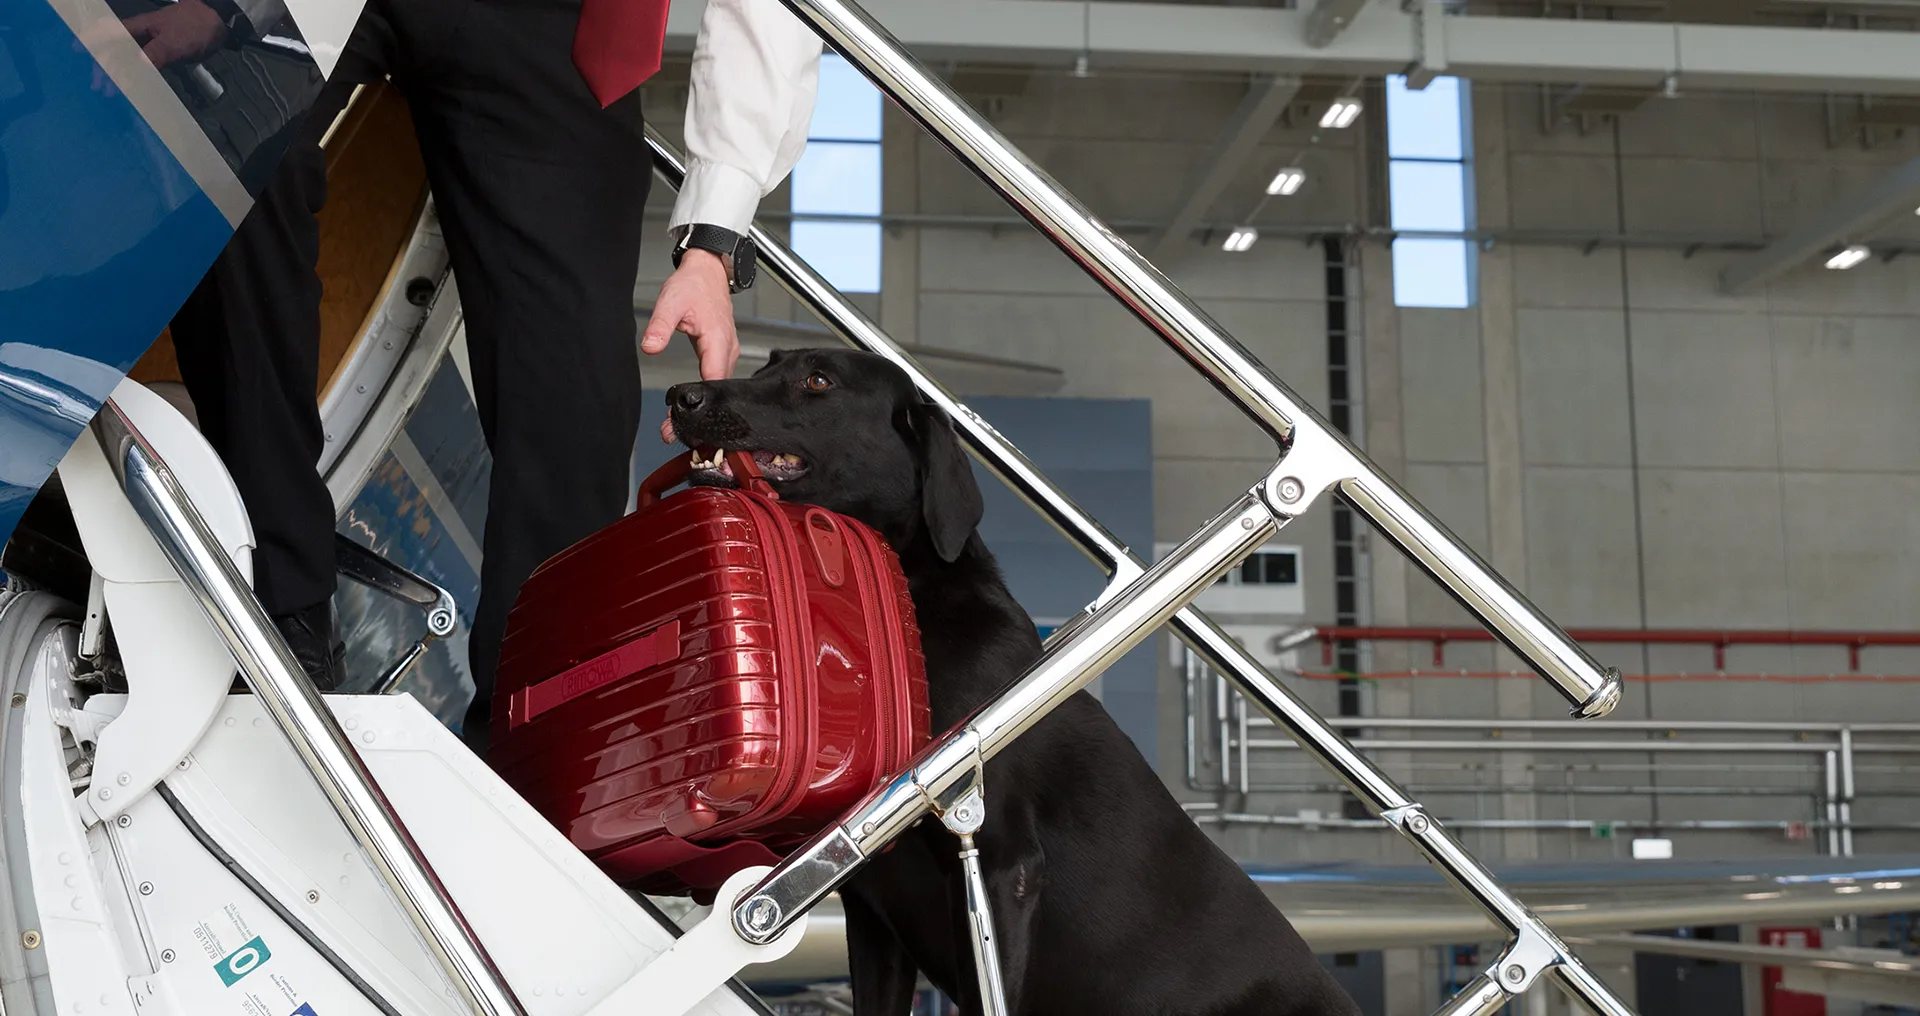 A dog carrying a suitcase to a jet.